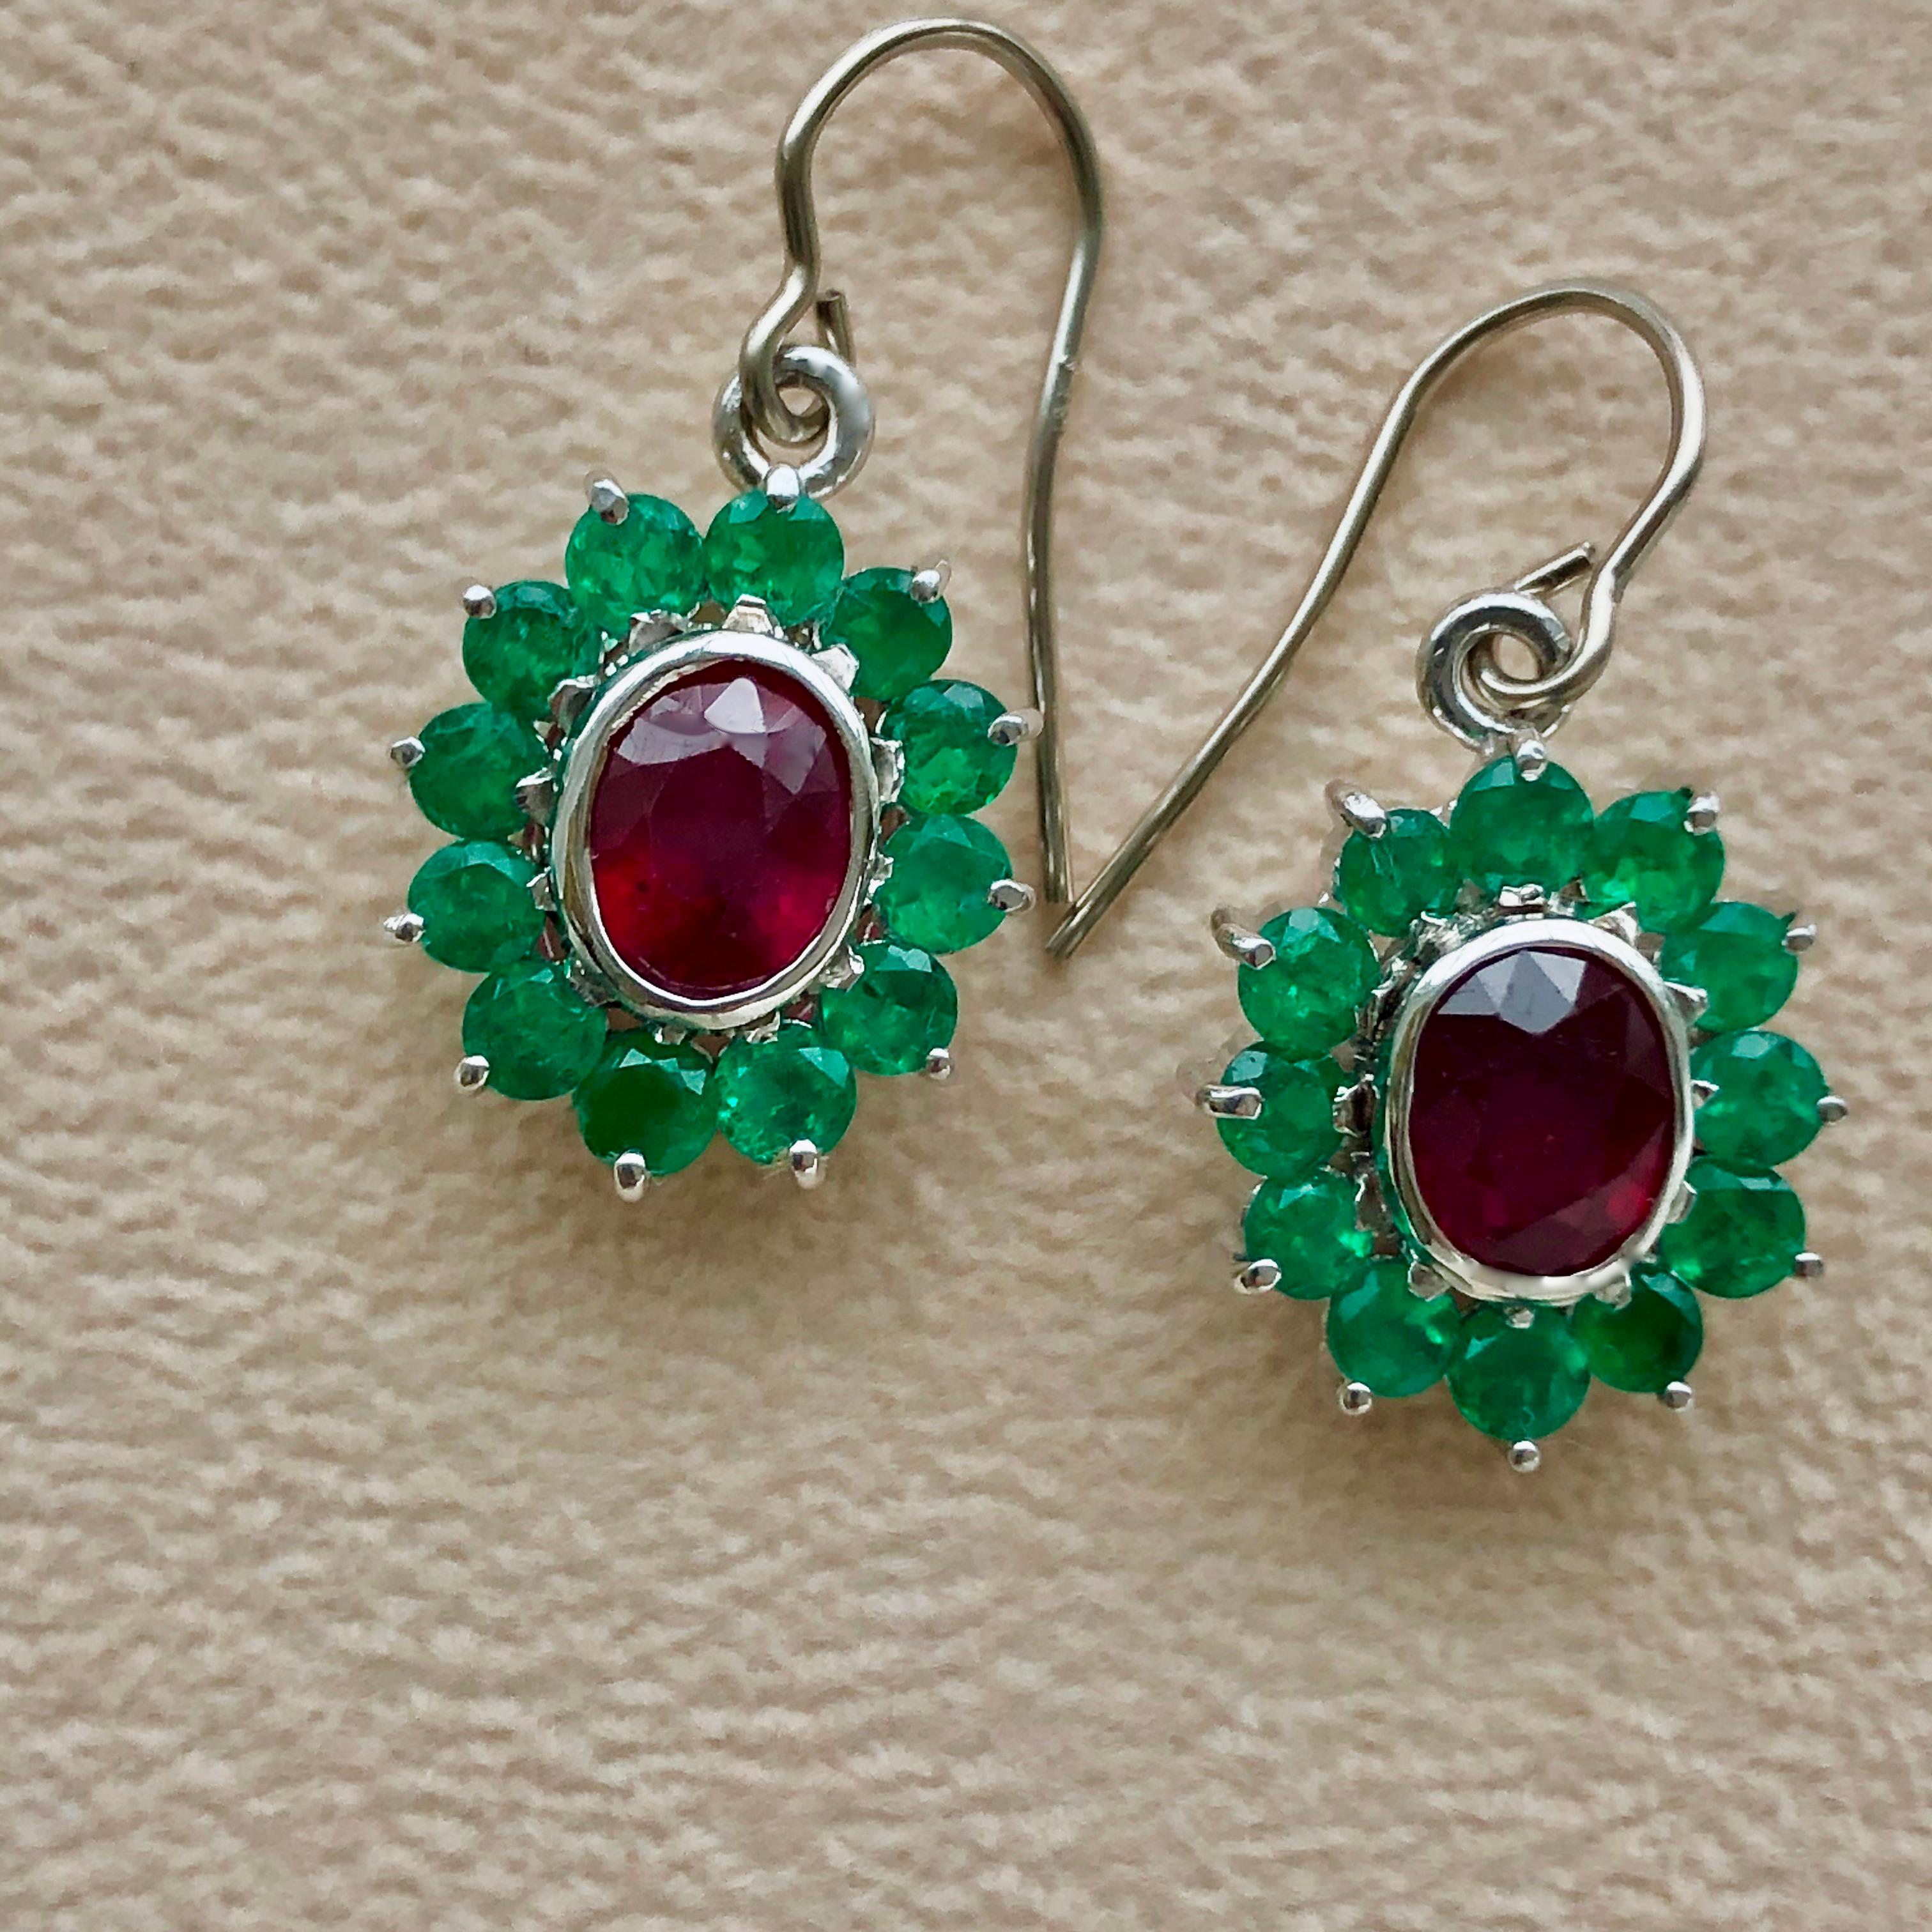 18 karat earrings with two oval cut rubies, total weight 2.90 carats (treated, heated, and filled).  And 24 round natural Colombian emeralds weighing 2.60 carats. Totaling gemstone weight of 5.50 carats. This classic style dangle earring handcrafted